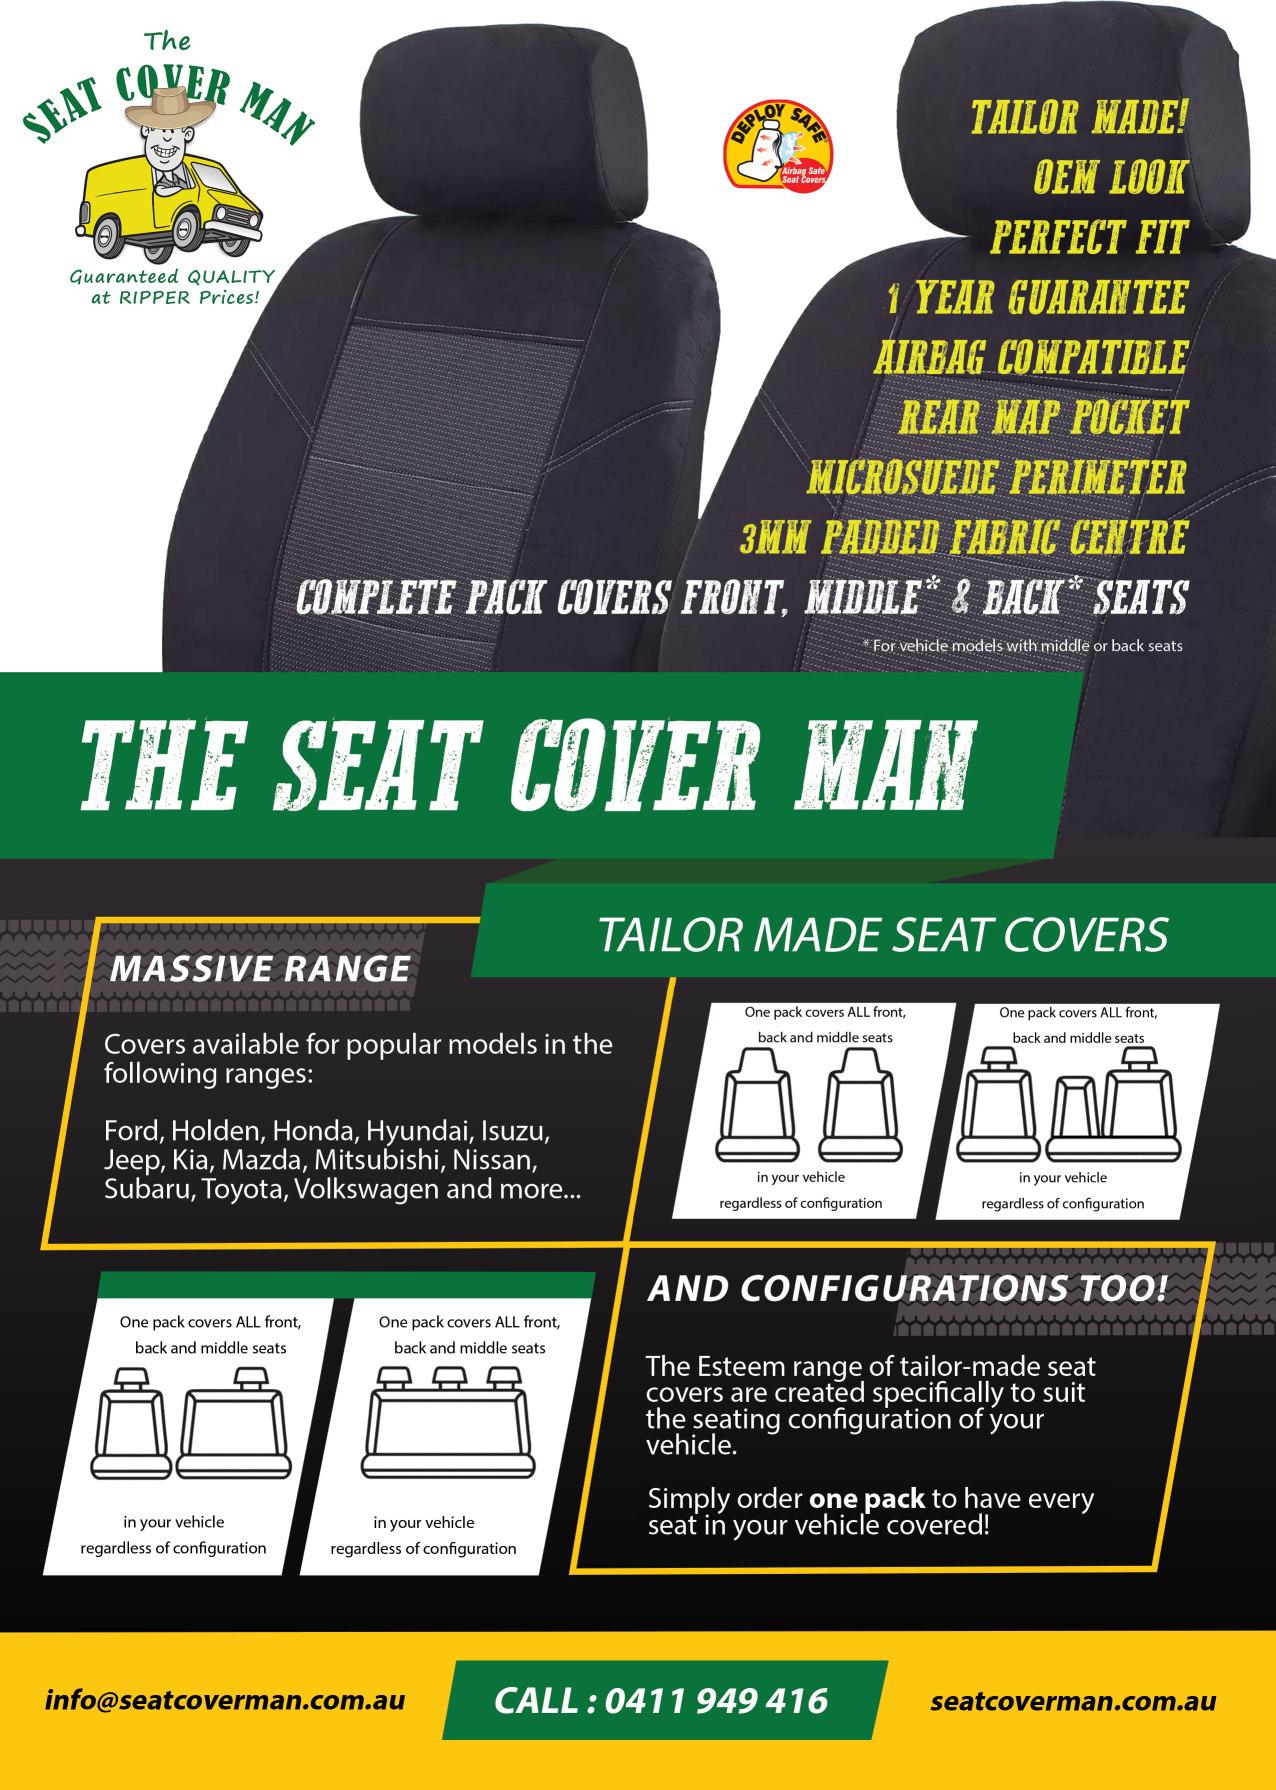 ESTEEM TAILOR MADE FABRIC CAR SEAT COVER TO SUIT MITSUBISHI PAJERO WAGON NS